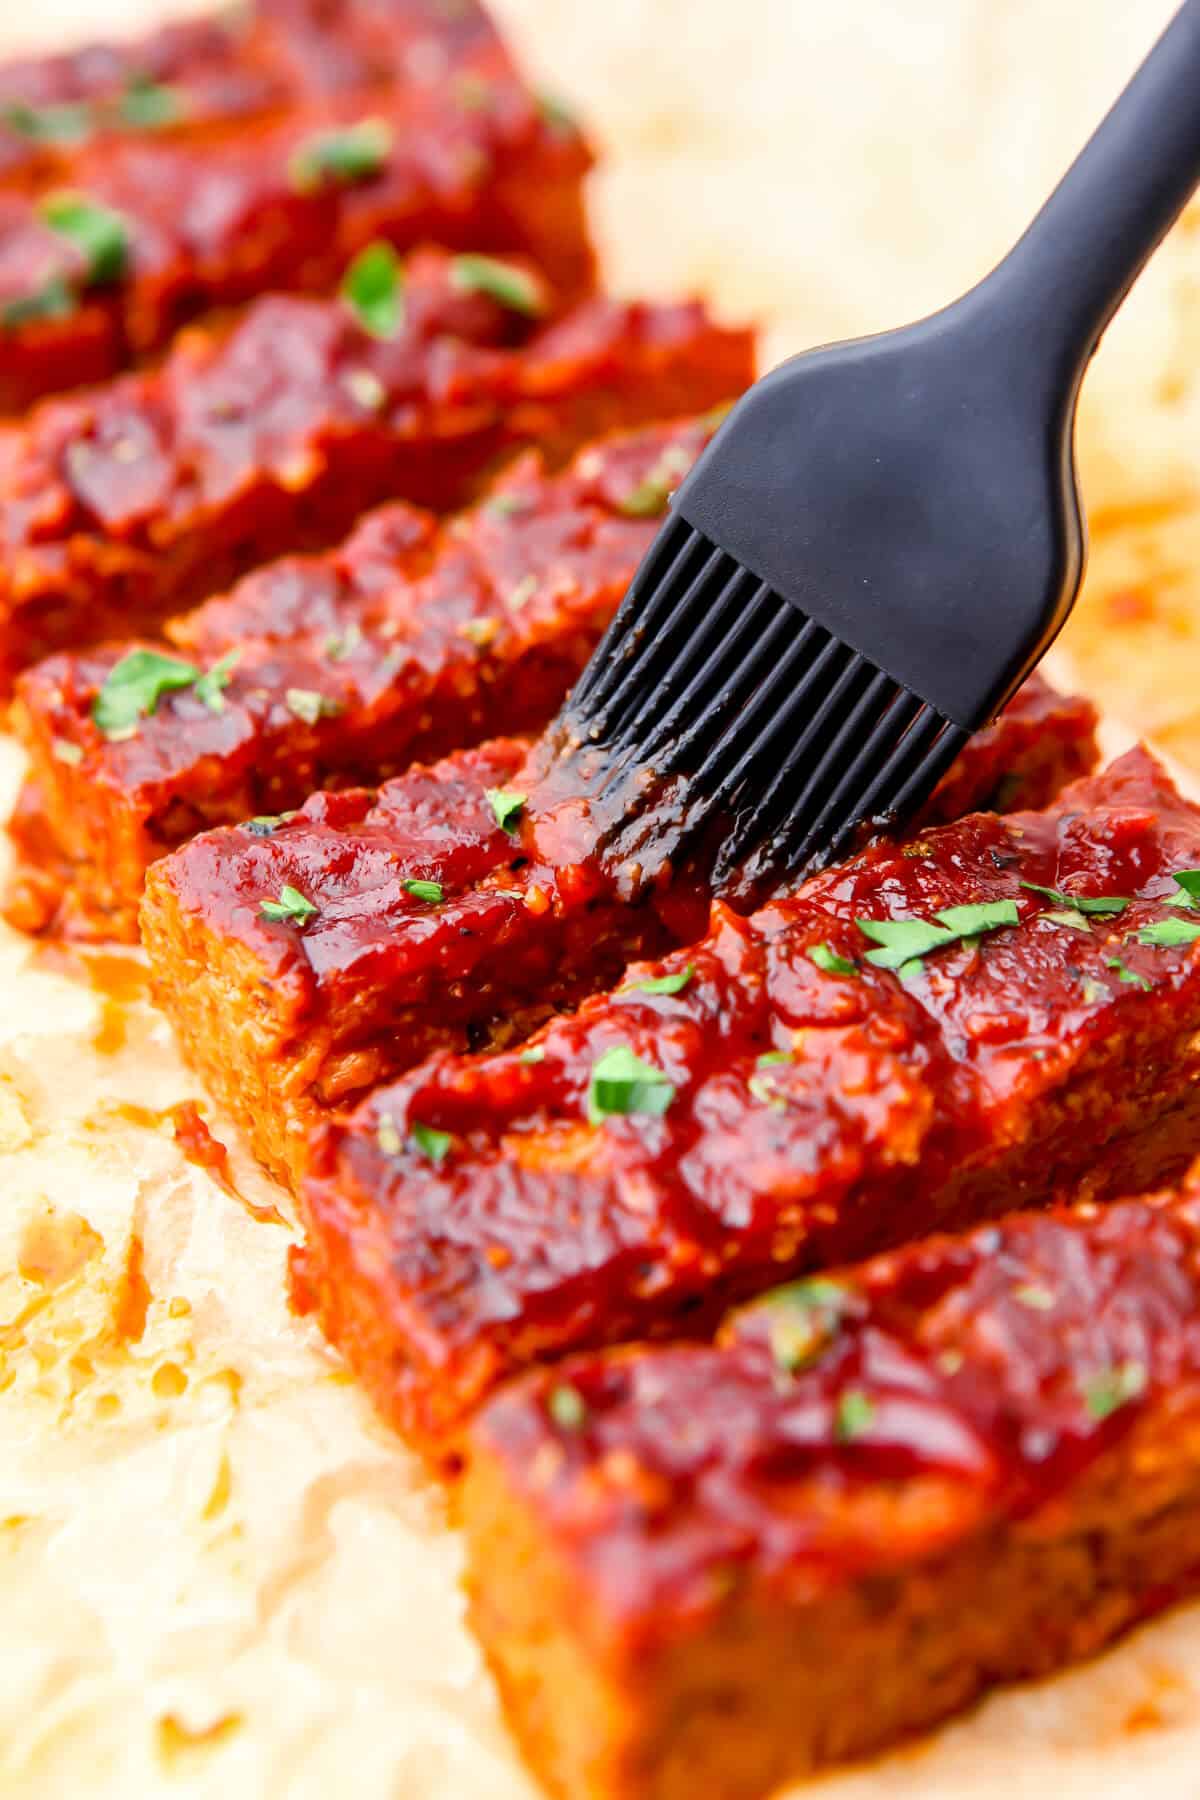 Vegan ribs being brushed with BBQ sauce.